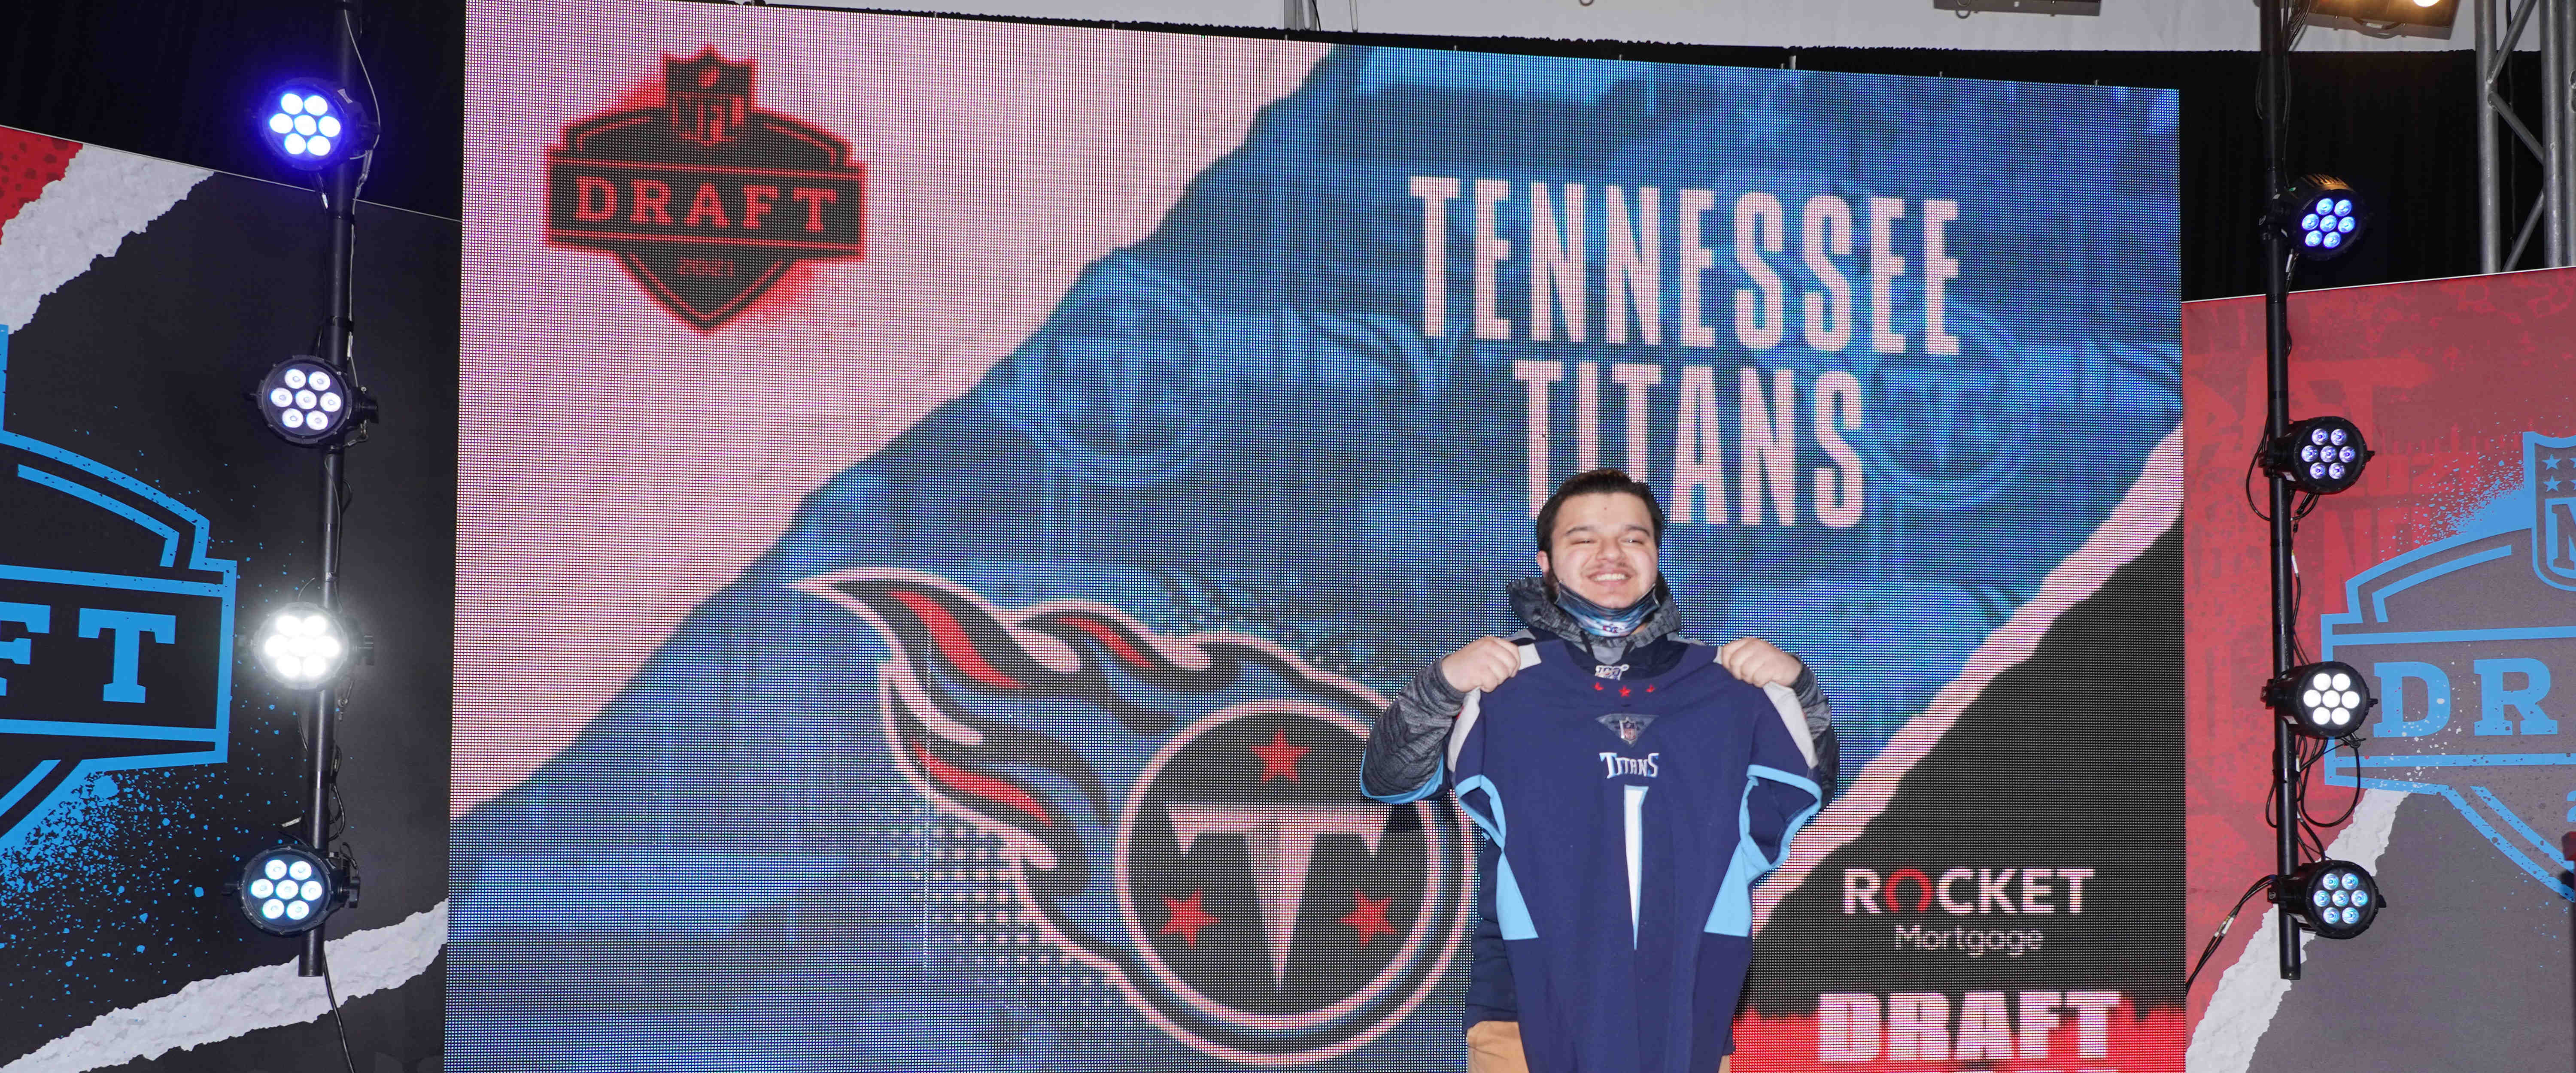 Tennessee Titans: Grading the 2021 Draft class